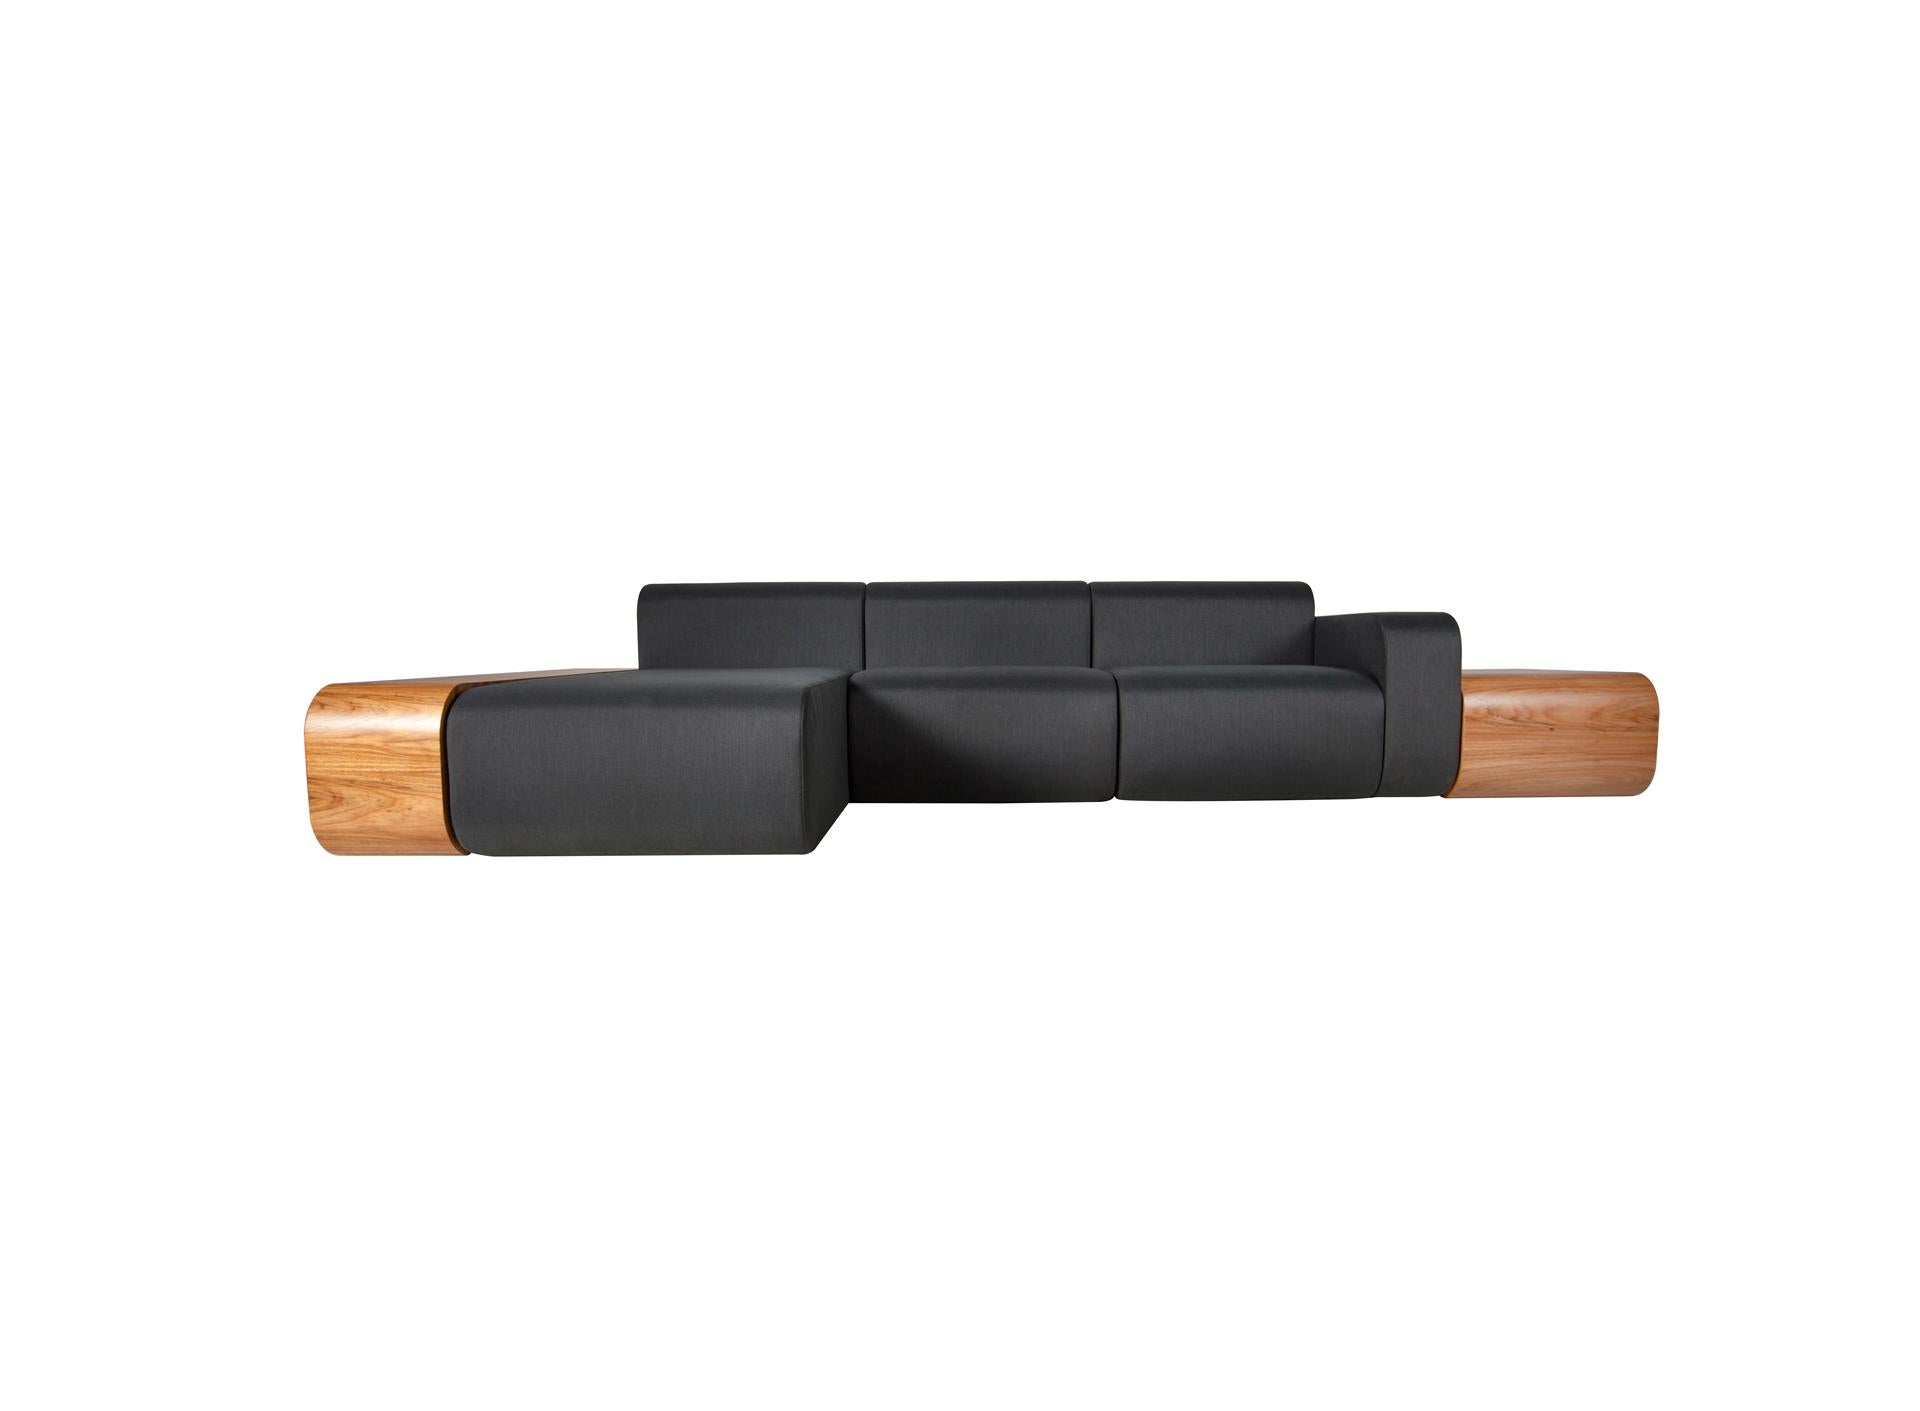 Riba Brazilian Contemporary Wood and Leather Sofa by Lattoog 1